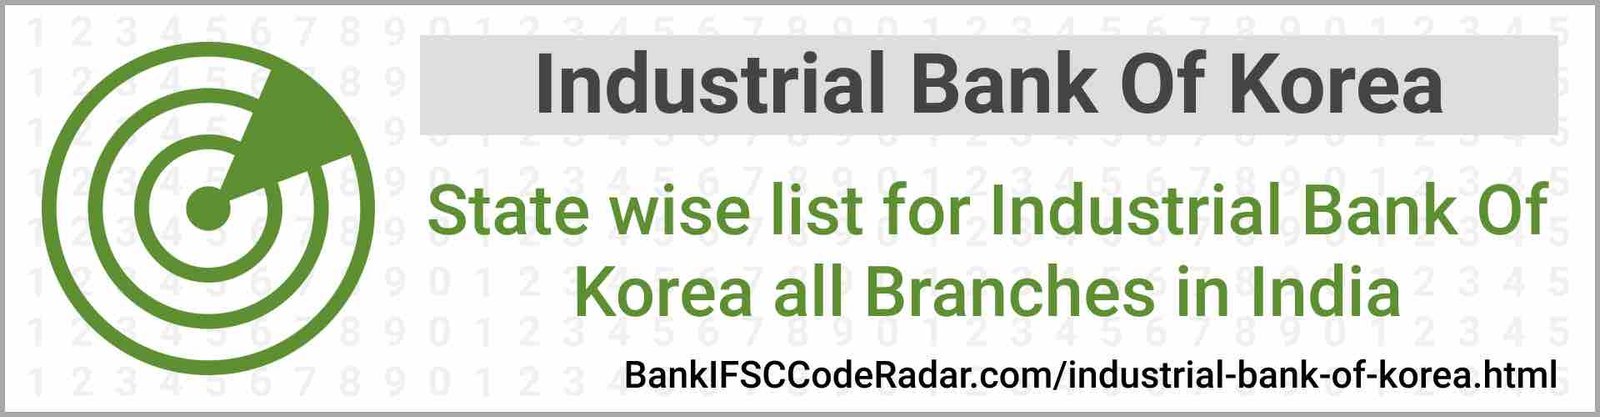 Industrial Bank Of Korea All Branches India